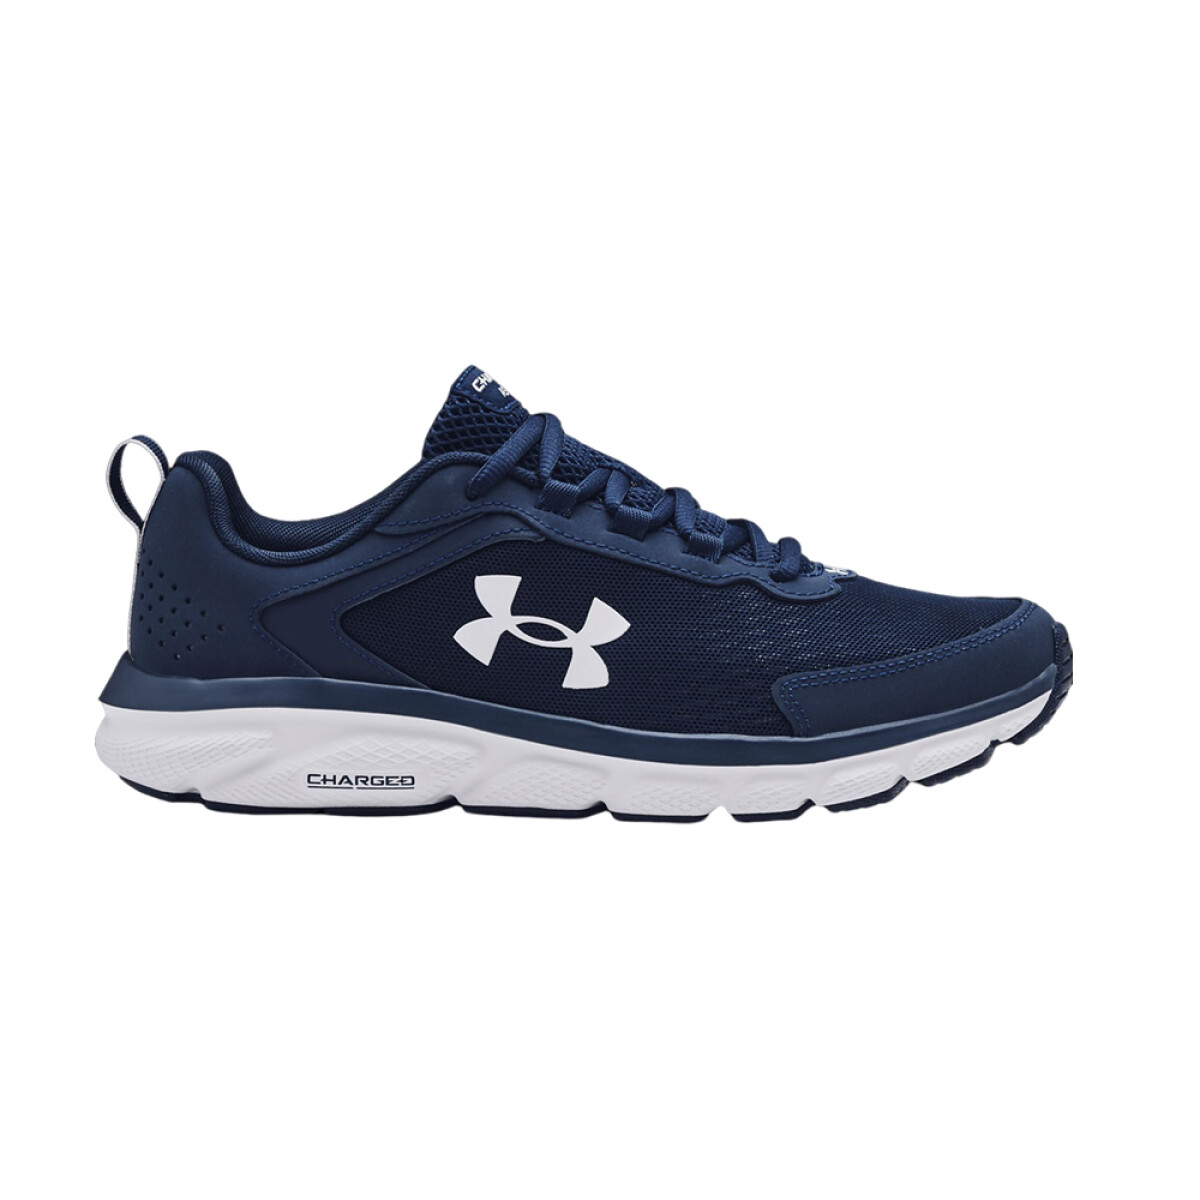 UNDER ARMOUR CHARGED ASSERT 9 - Blue 